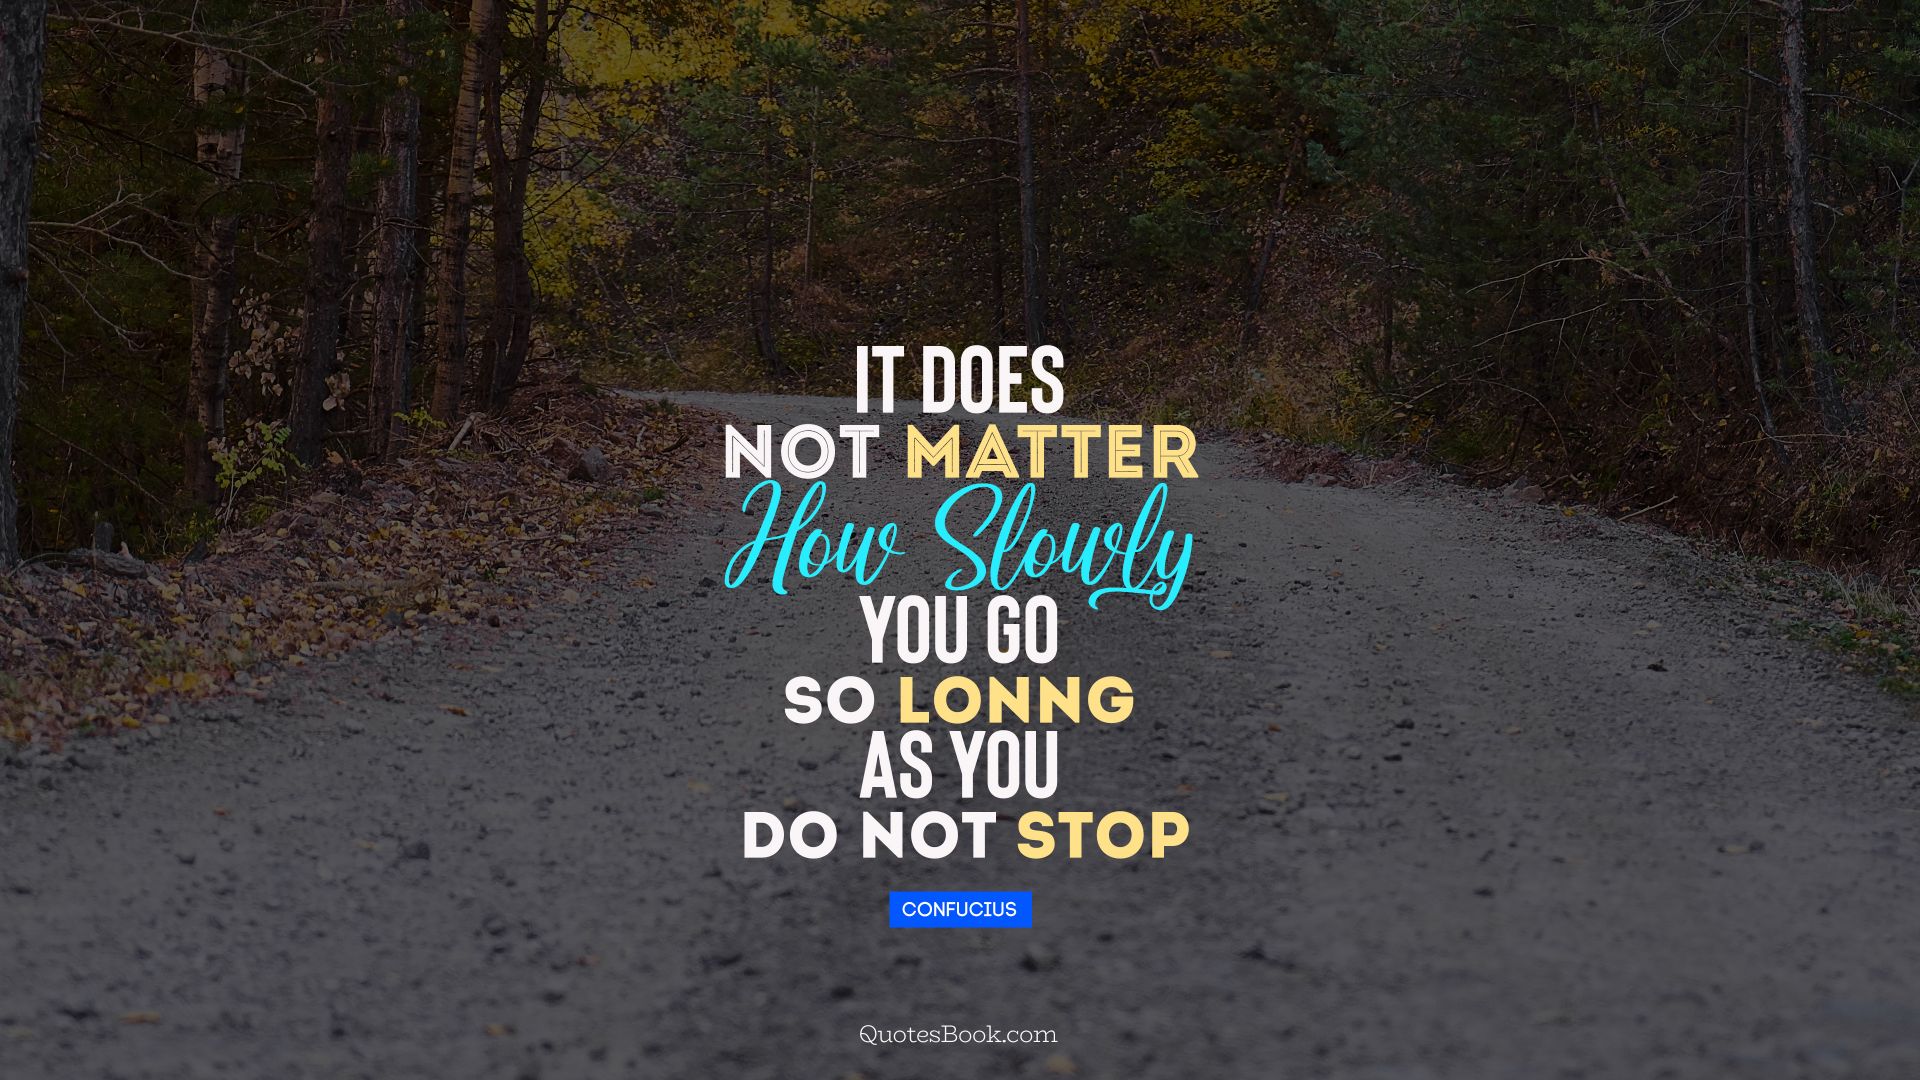 It does not matter how slowly you go so lonng as you do not stop. - Quote by Confucius